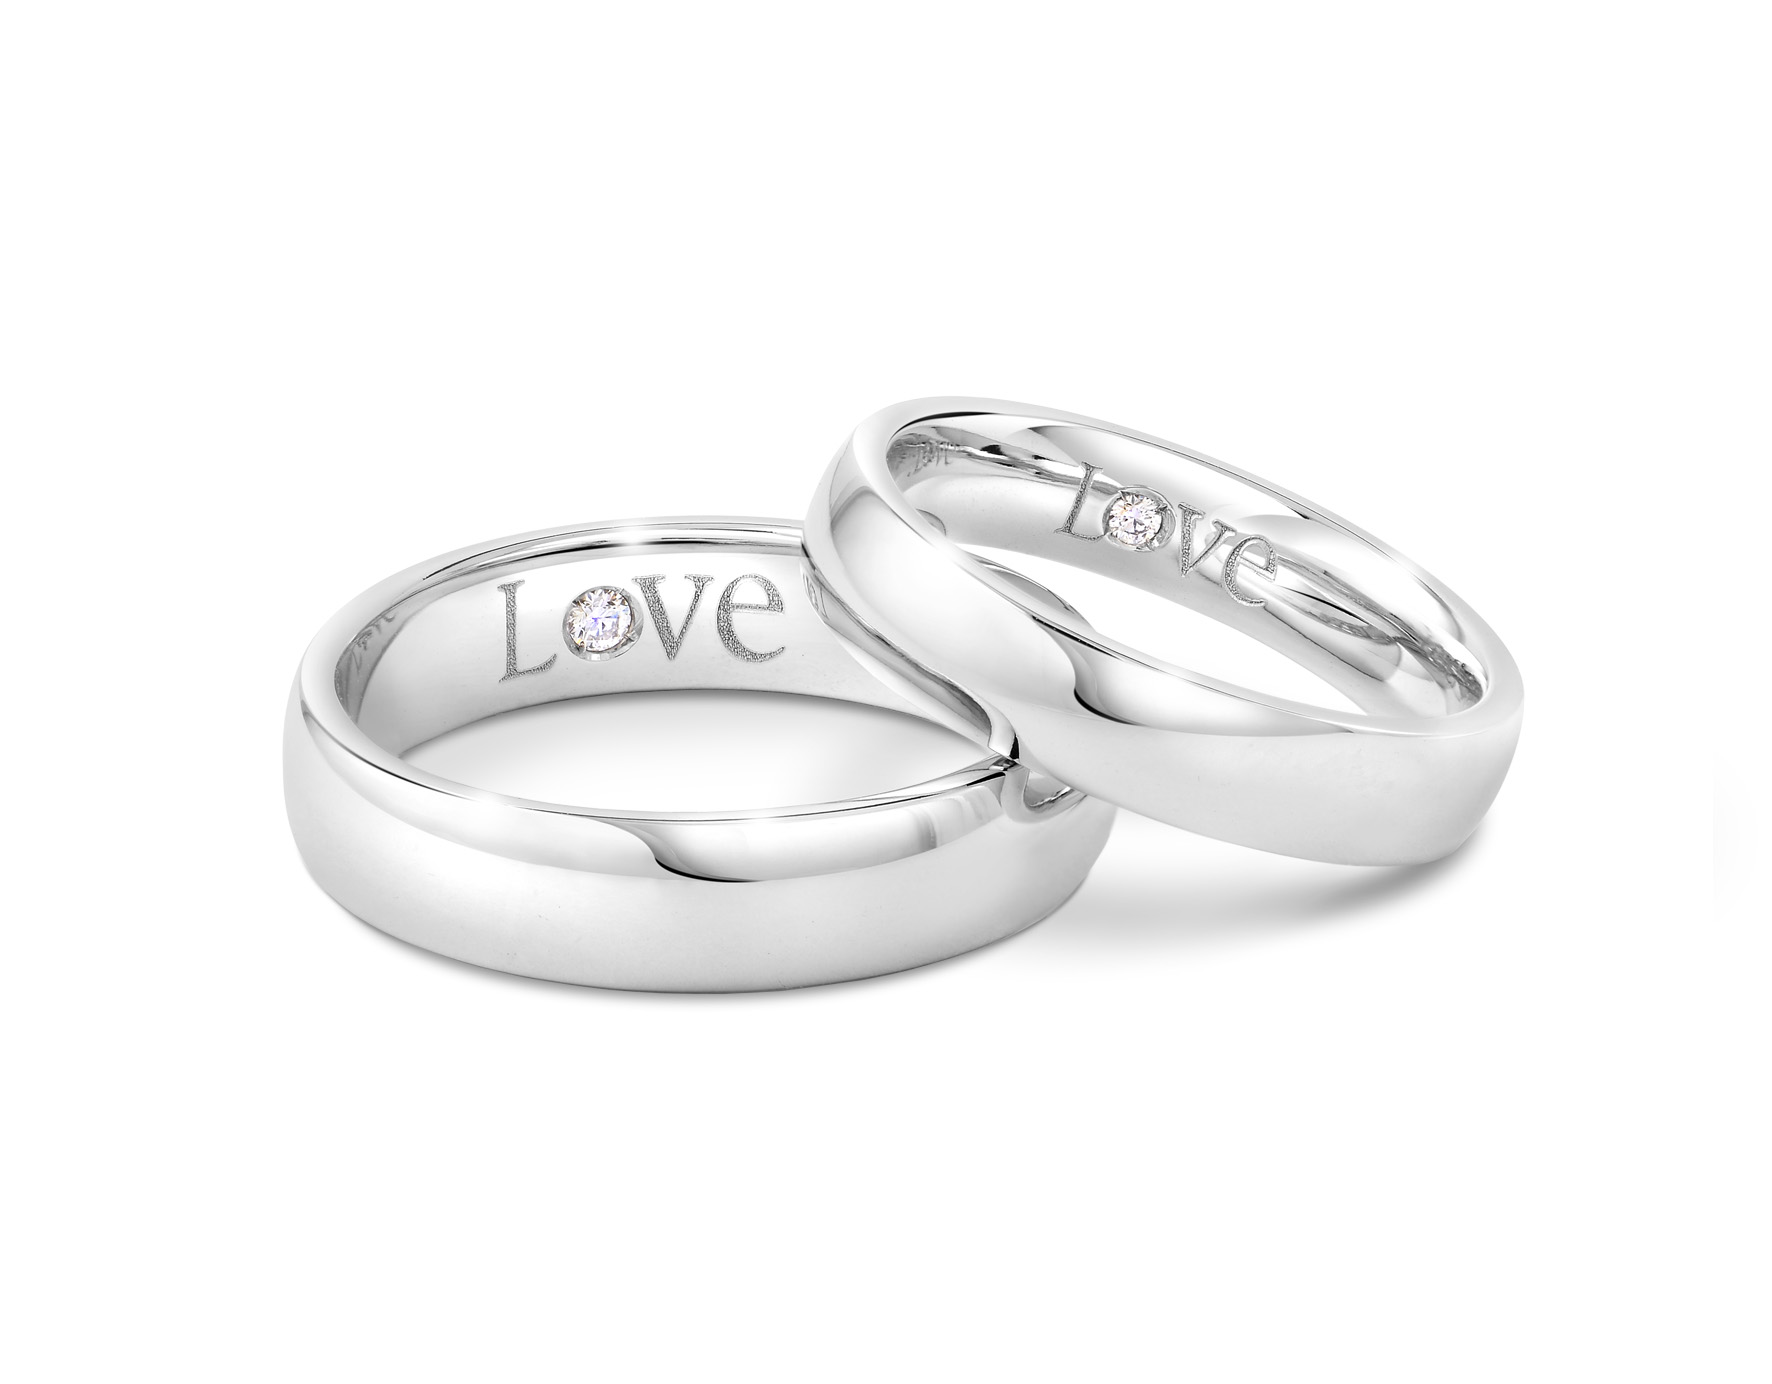 Signature Love Collection in 18K White Gold.